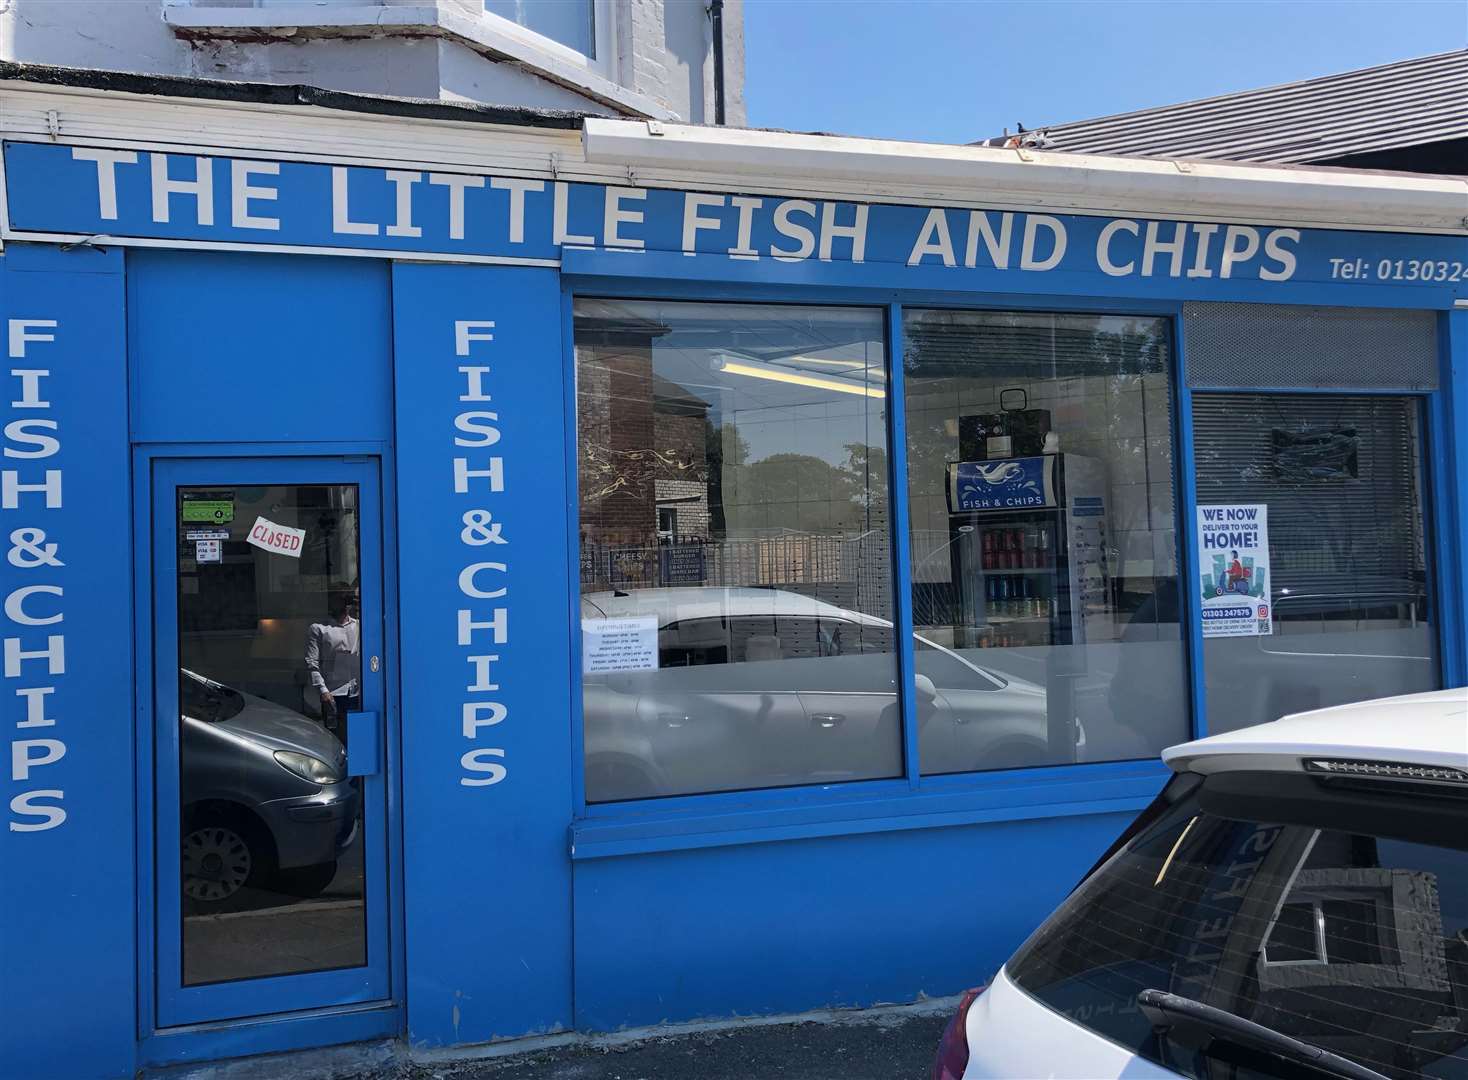 Hassan Bingol, owner of the Little Fish And Chips shop in Canterbury Road, believes the new flats will be good for business